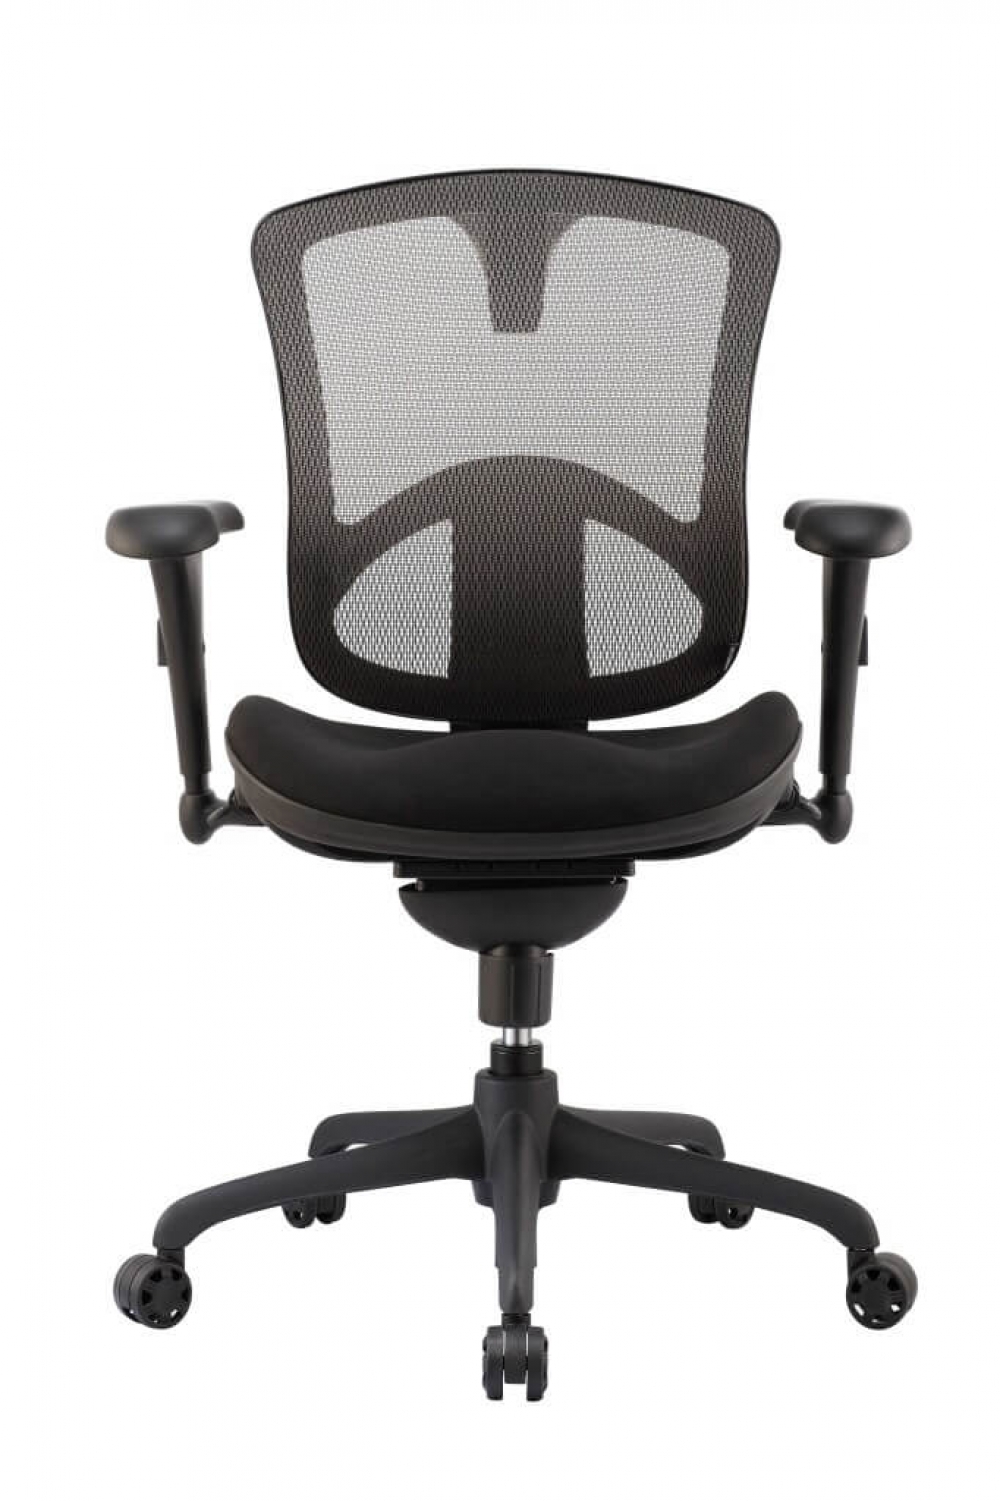 Black office chair front view